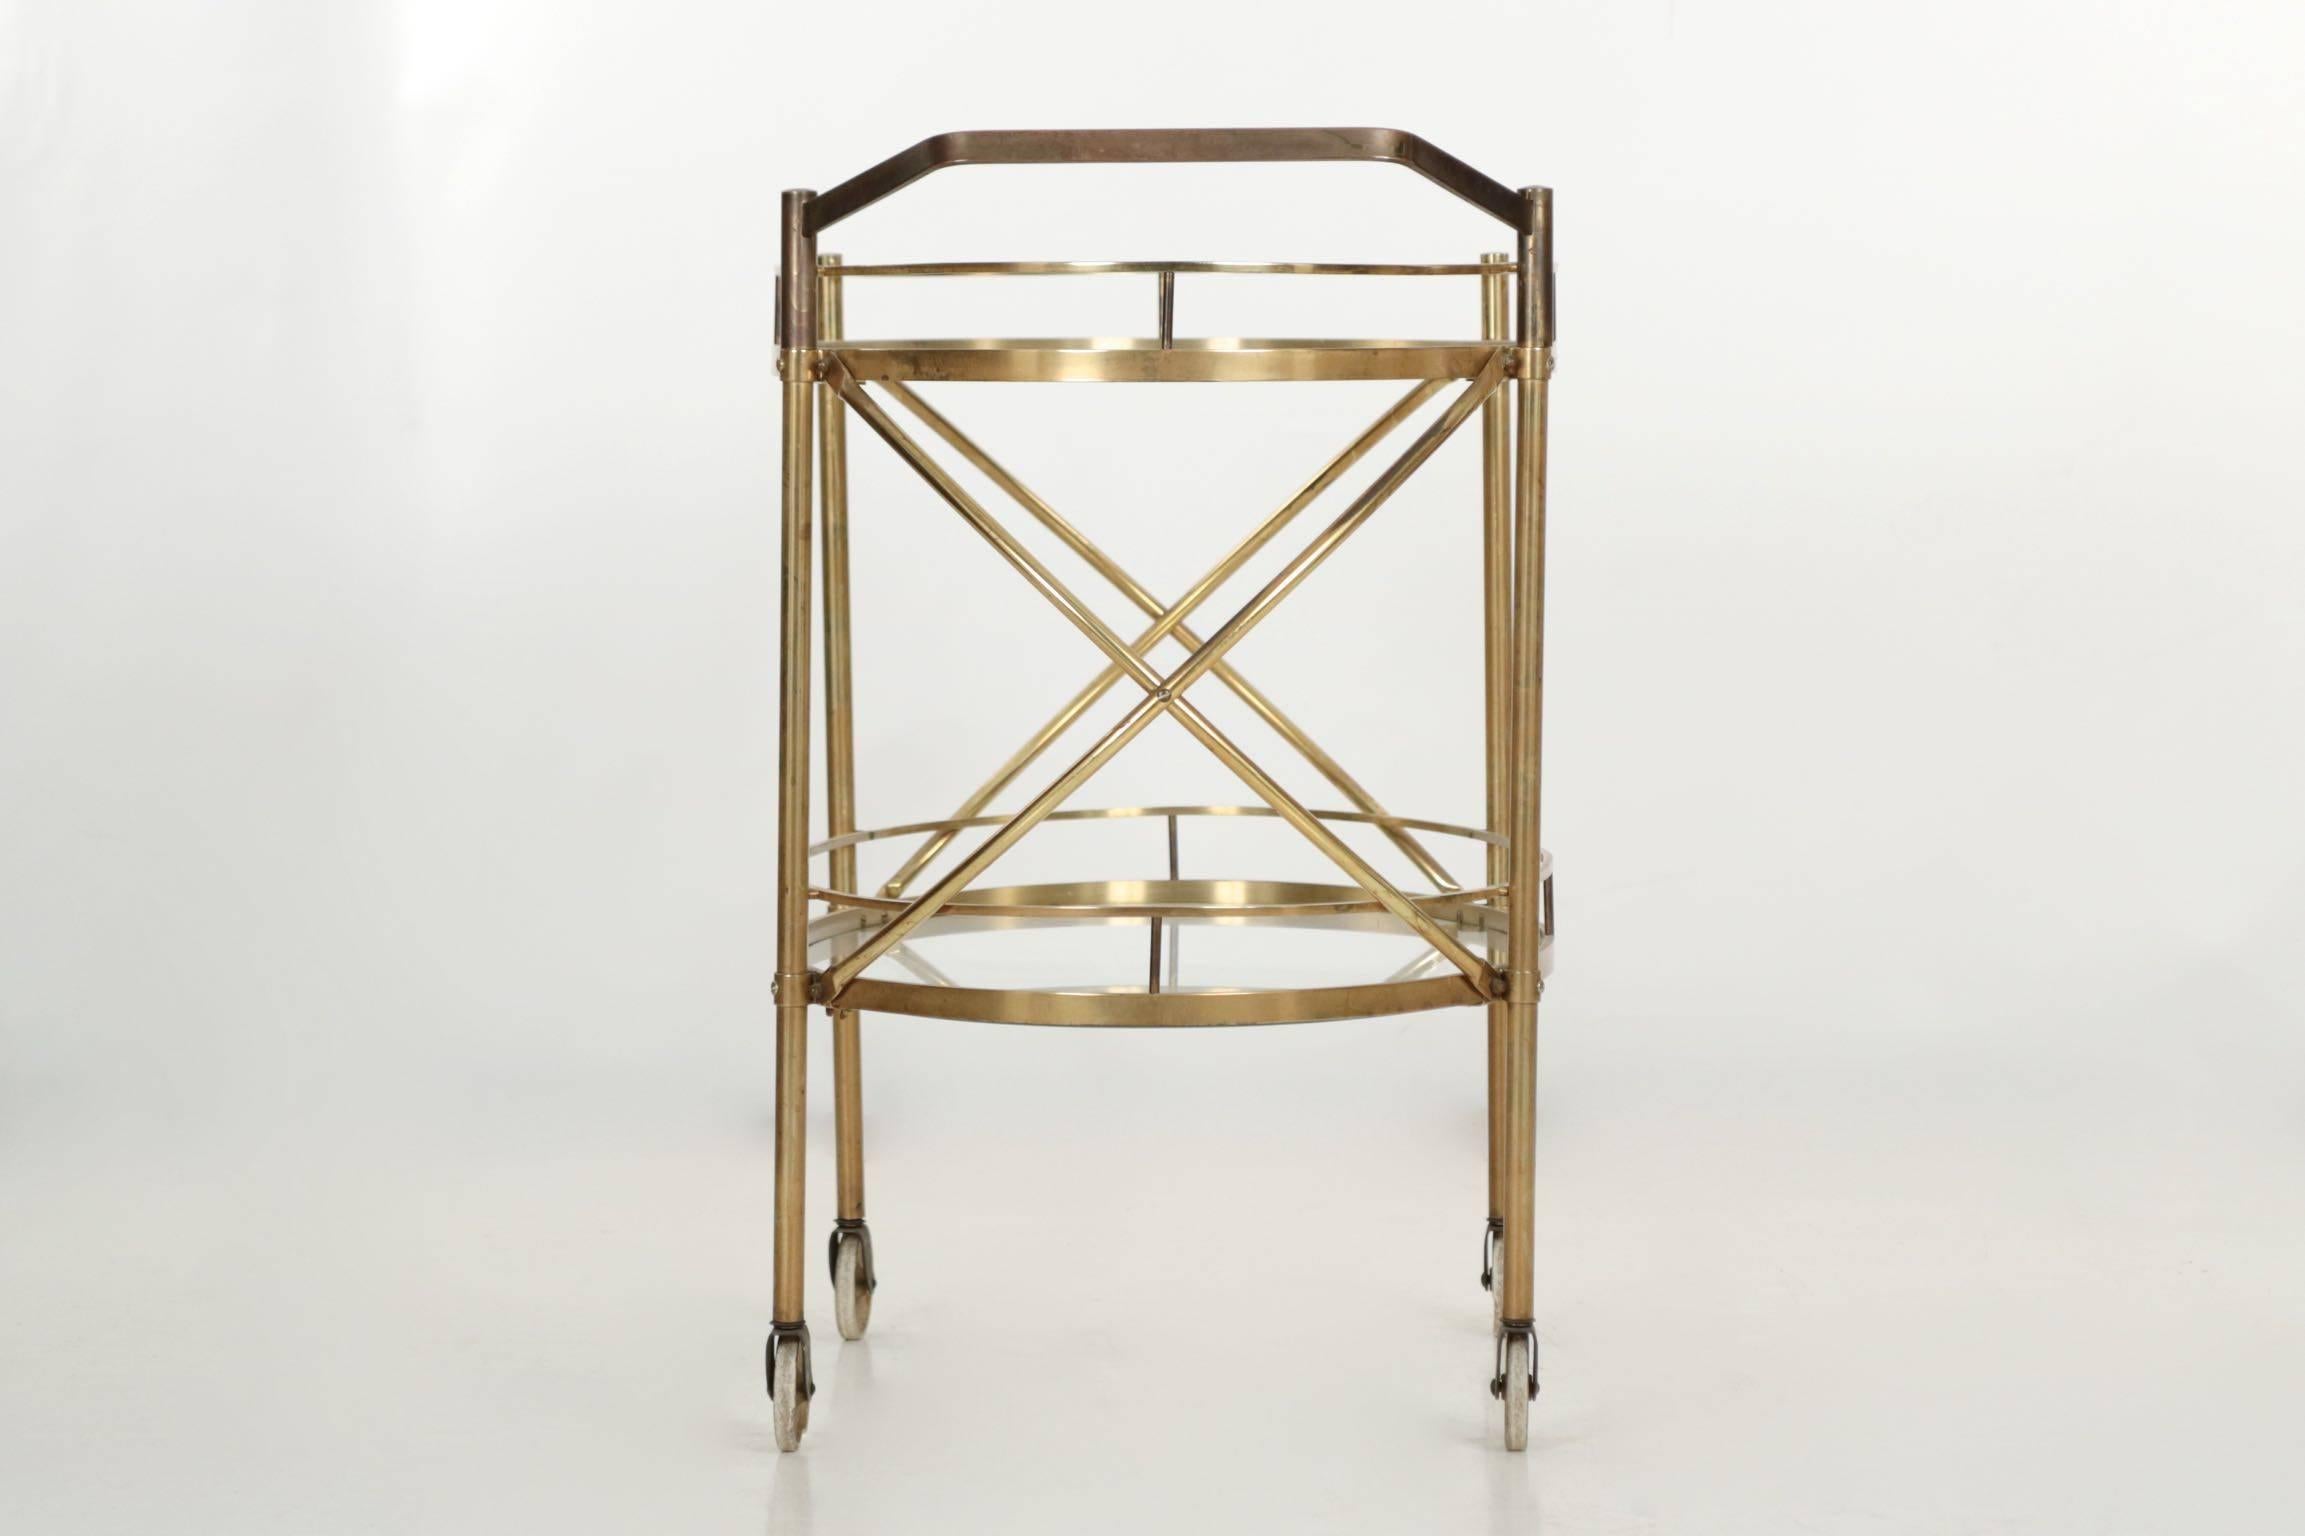 Italian Vintage Server Bar Cart Trolley Oval Brass & Glass Two-Tier Table circa 1960's